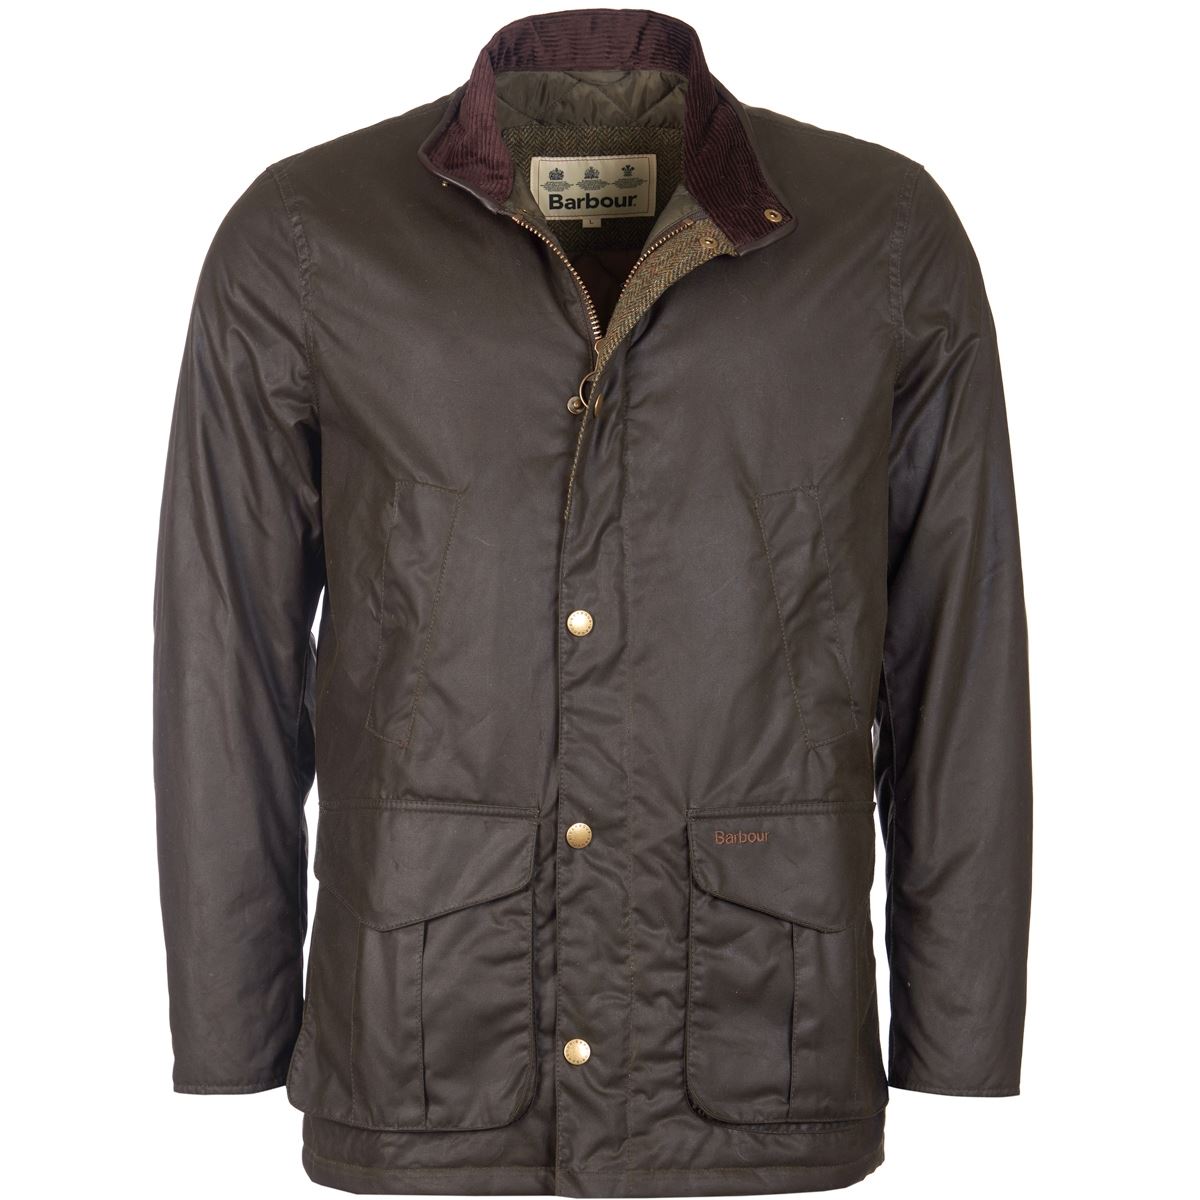 How do I know which barbour jacket to buy?